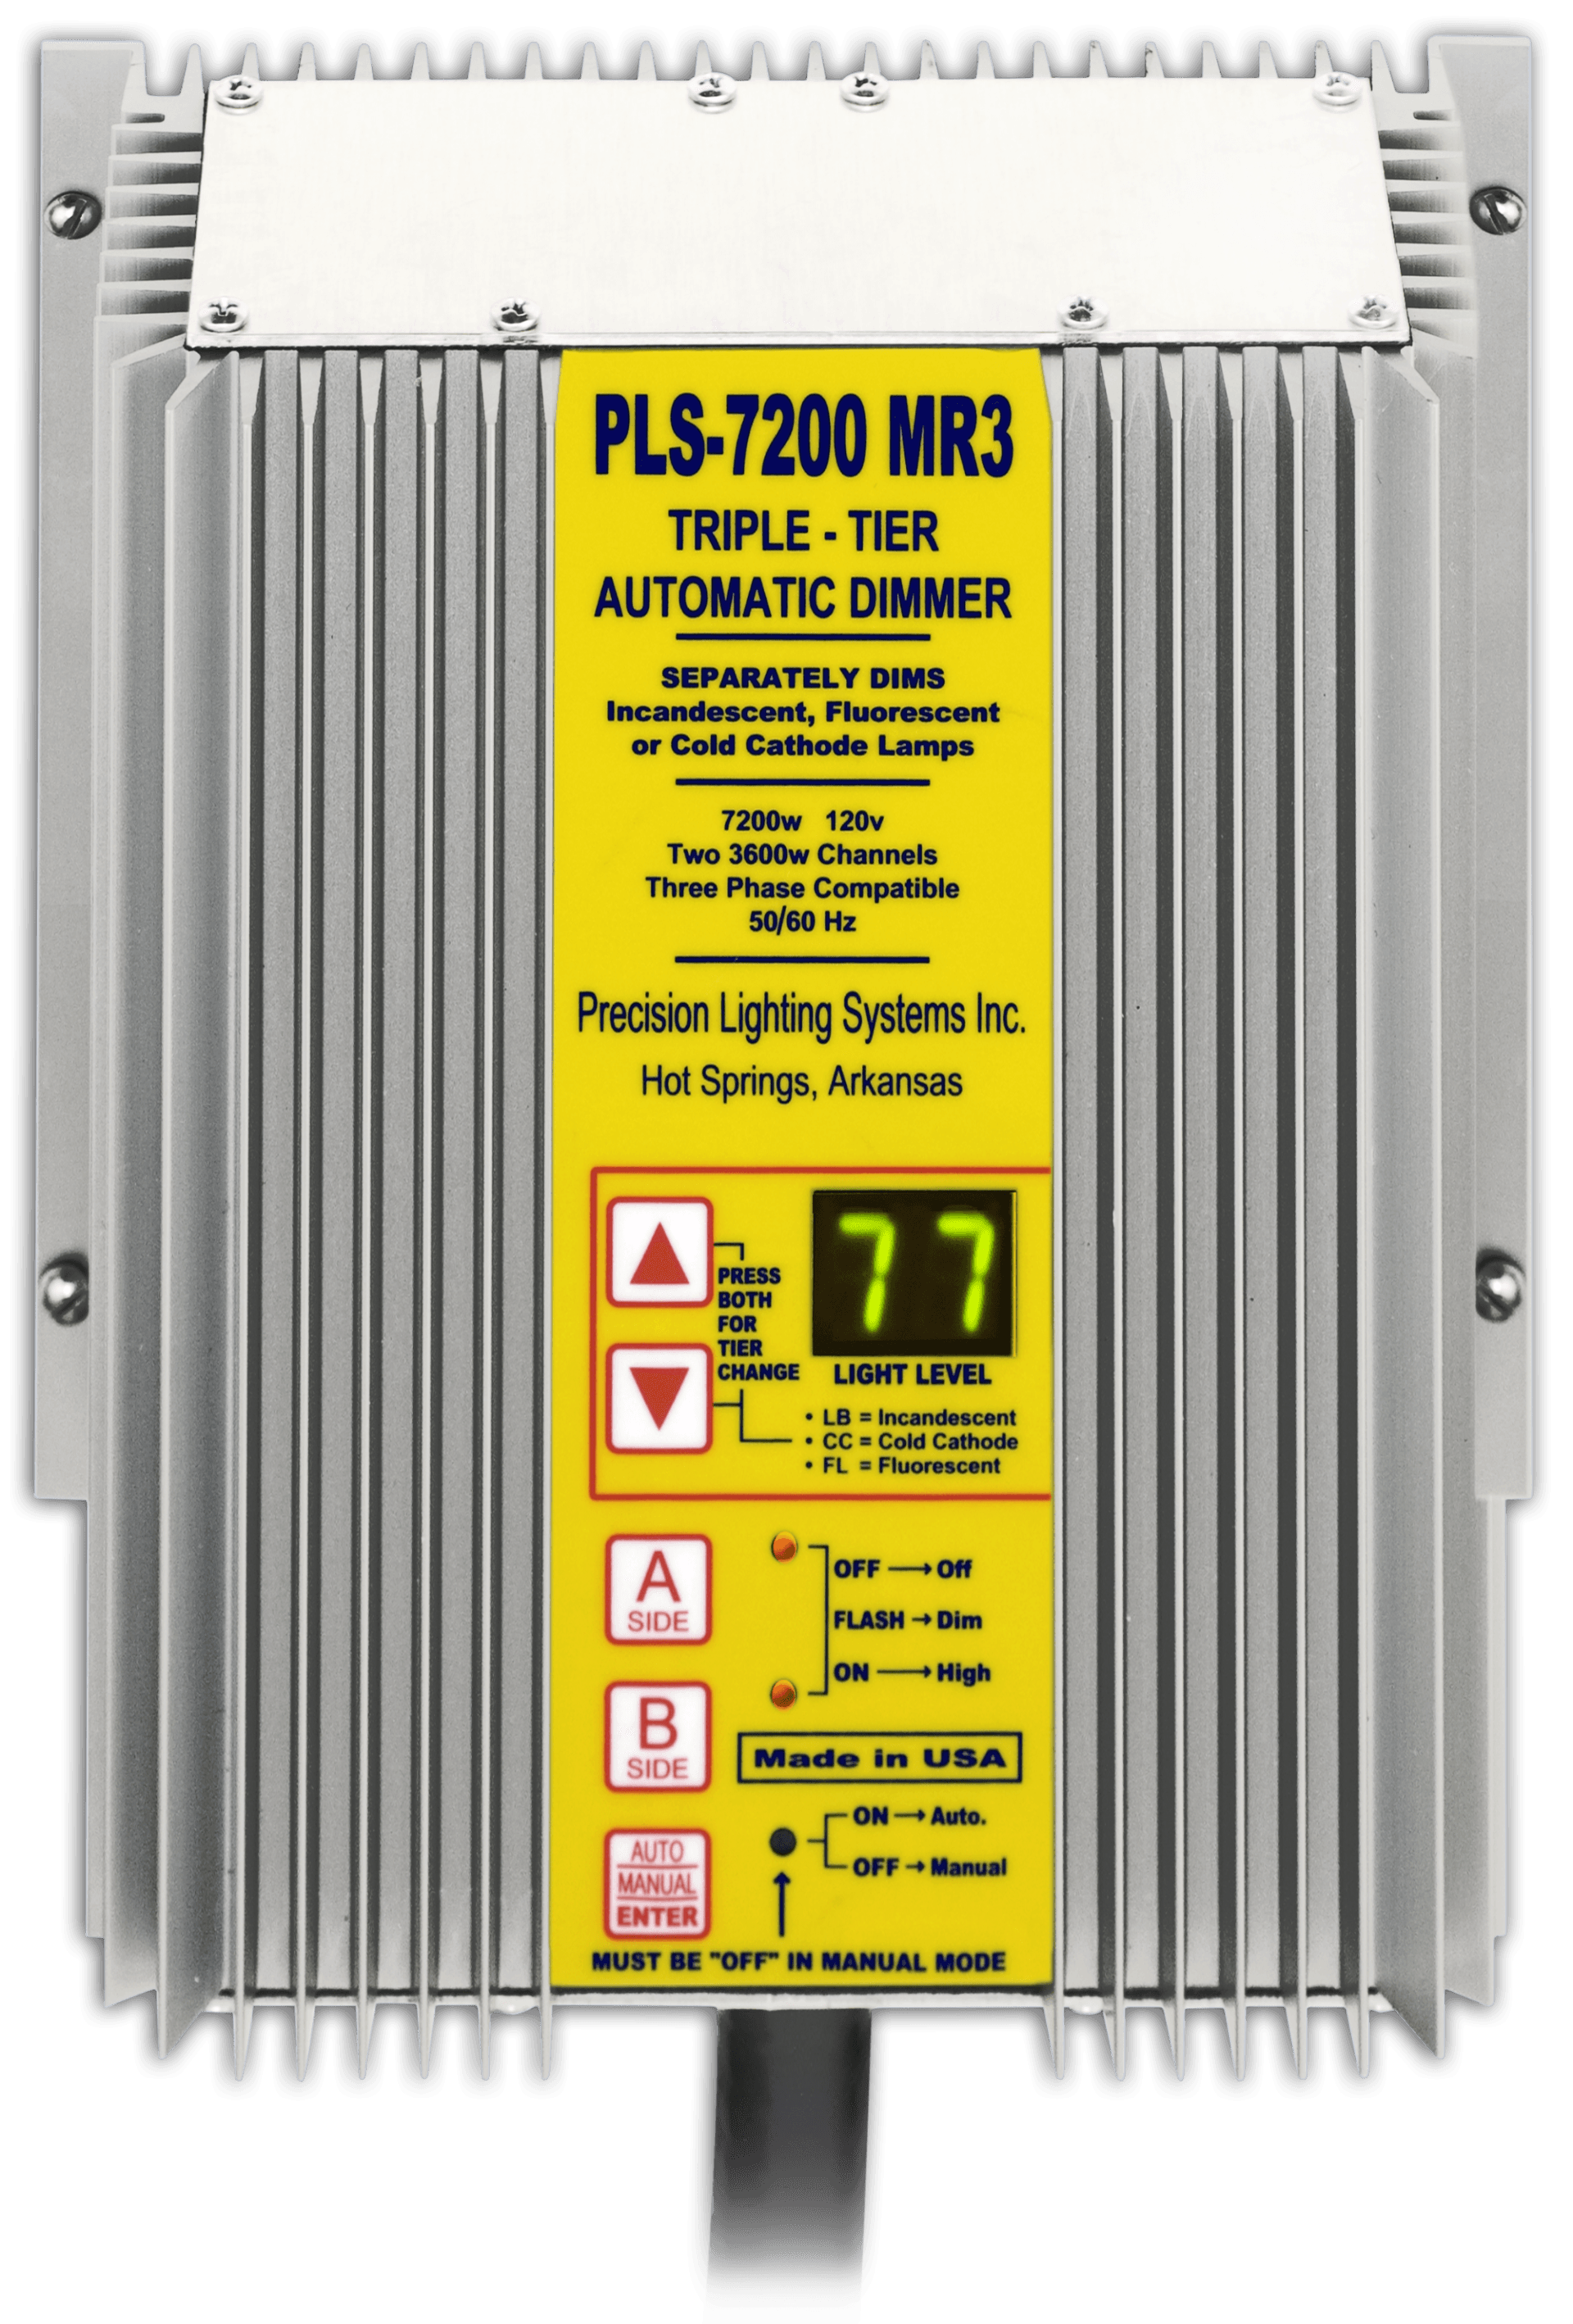 A picture of a pls-7200 mr3 triple tier automatic dimmer